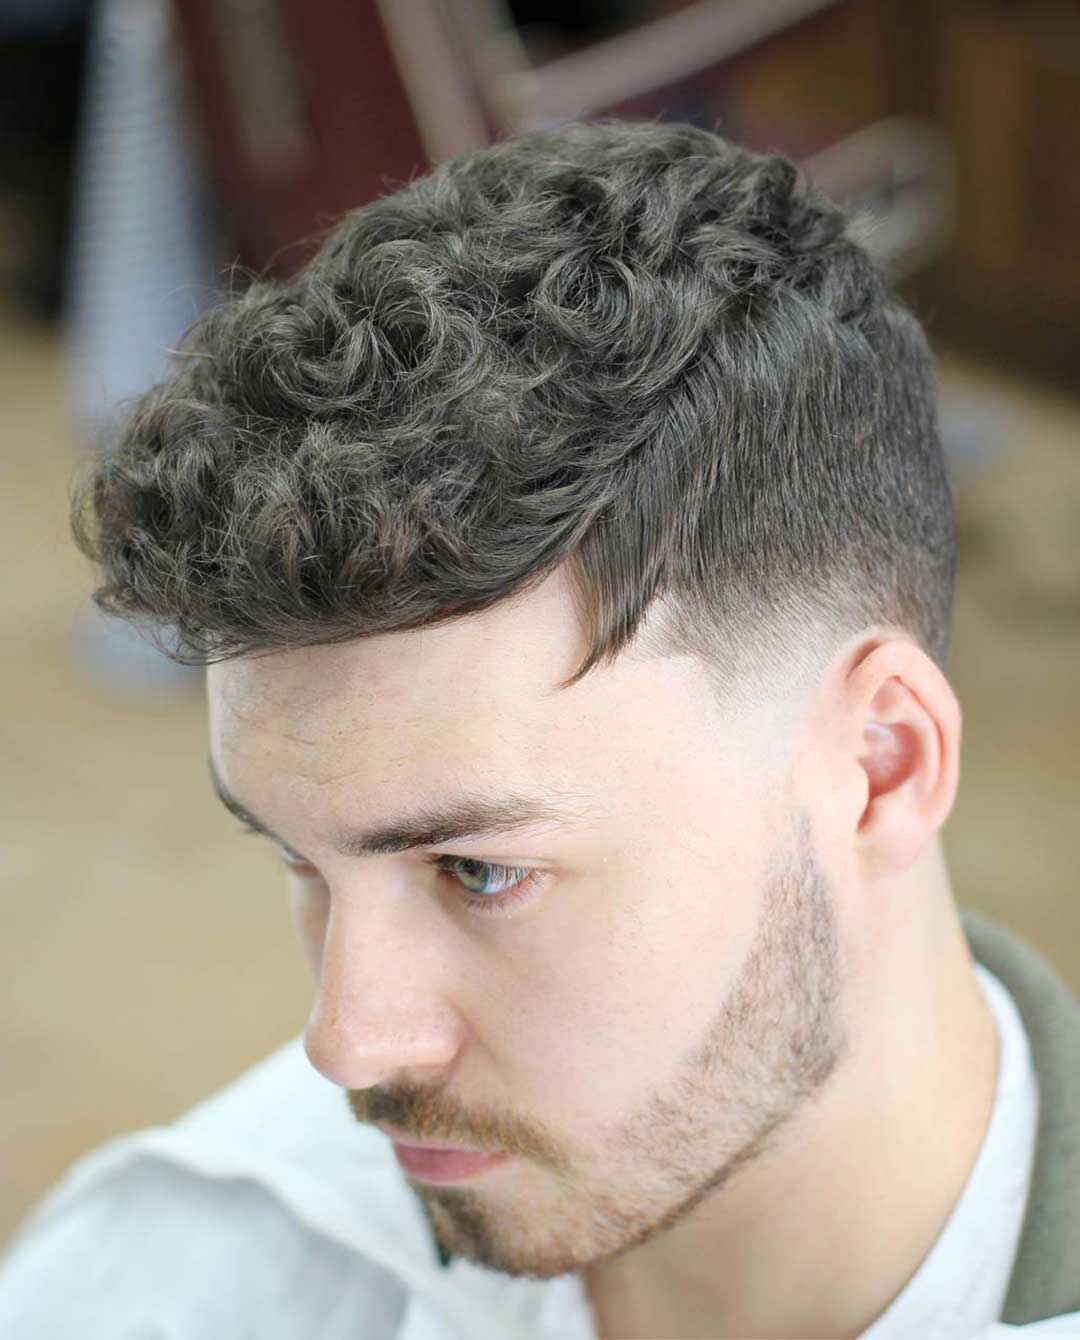 26+ Best Perm Hairstyles & Haircuts for Men - Men's Hairstyle Tips